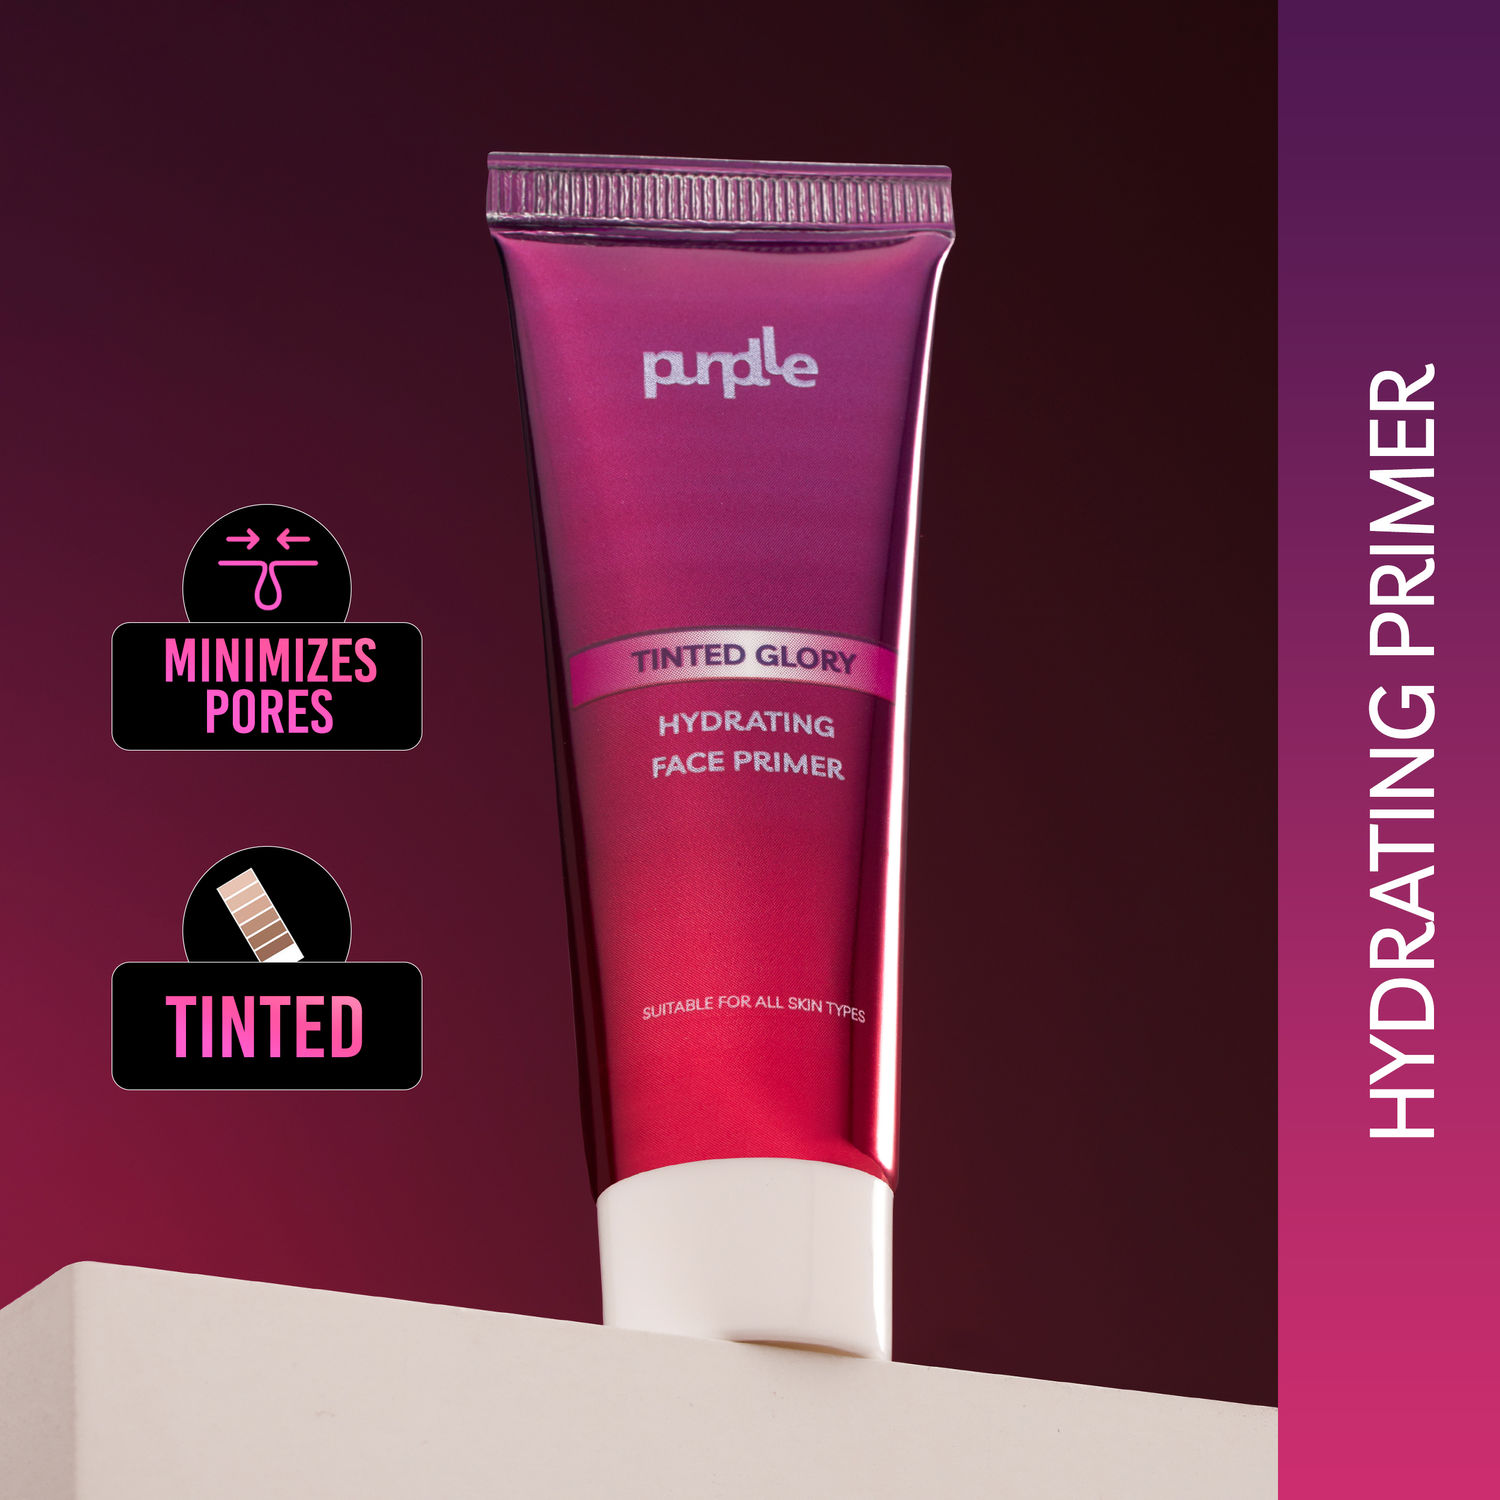 Purplle Tinted Glory Hydrating Face Primer (30 gm)